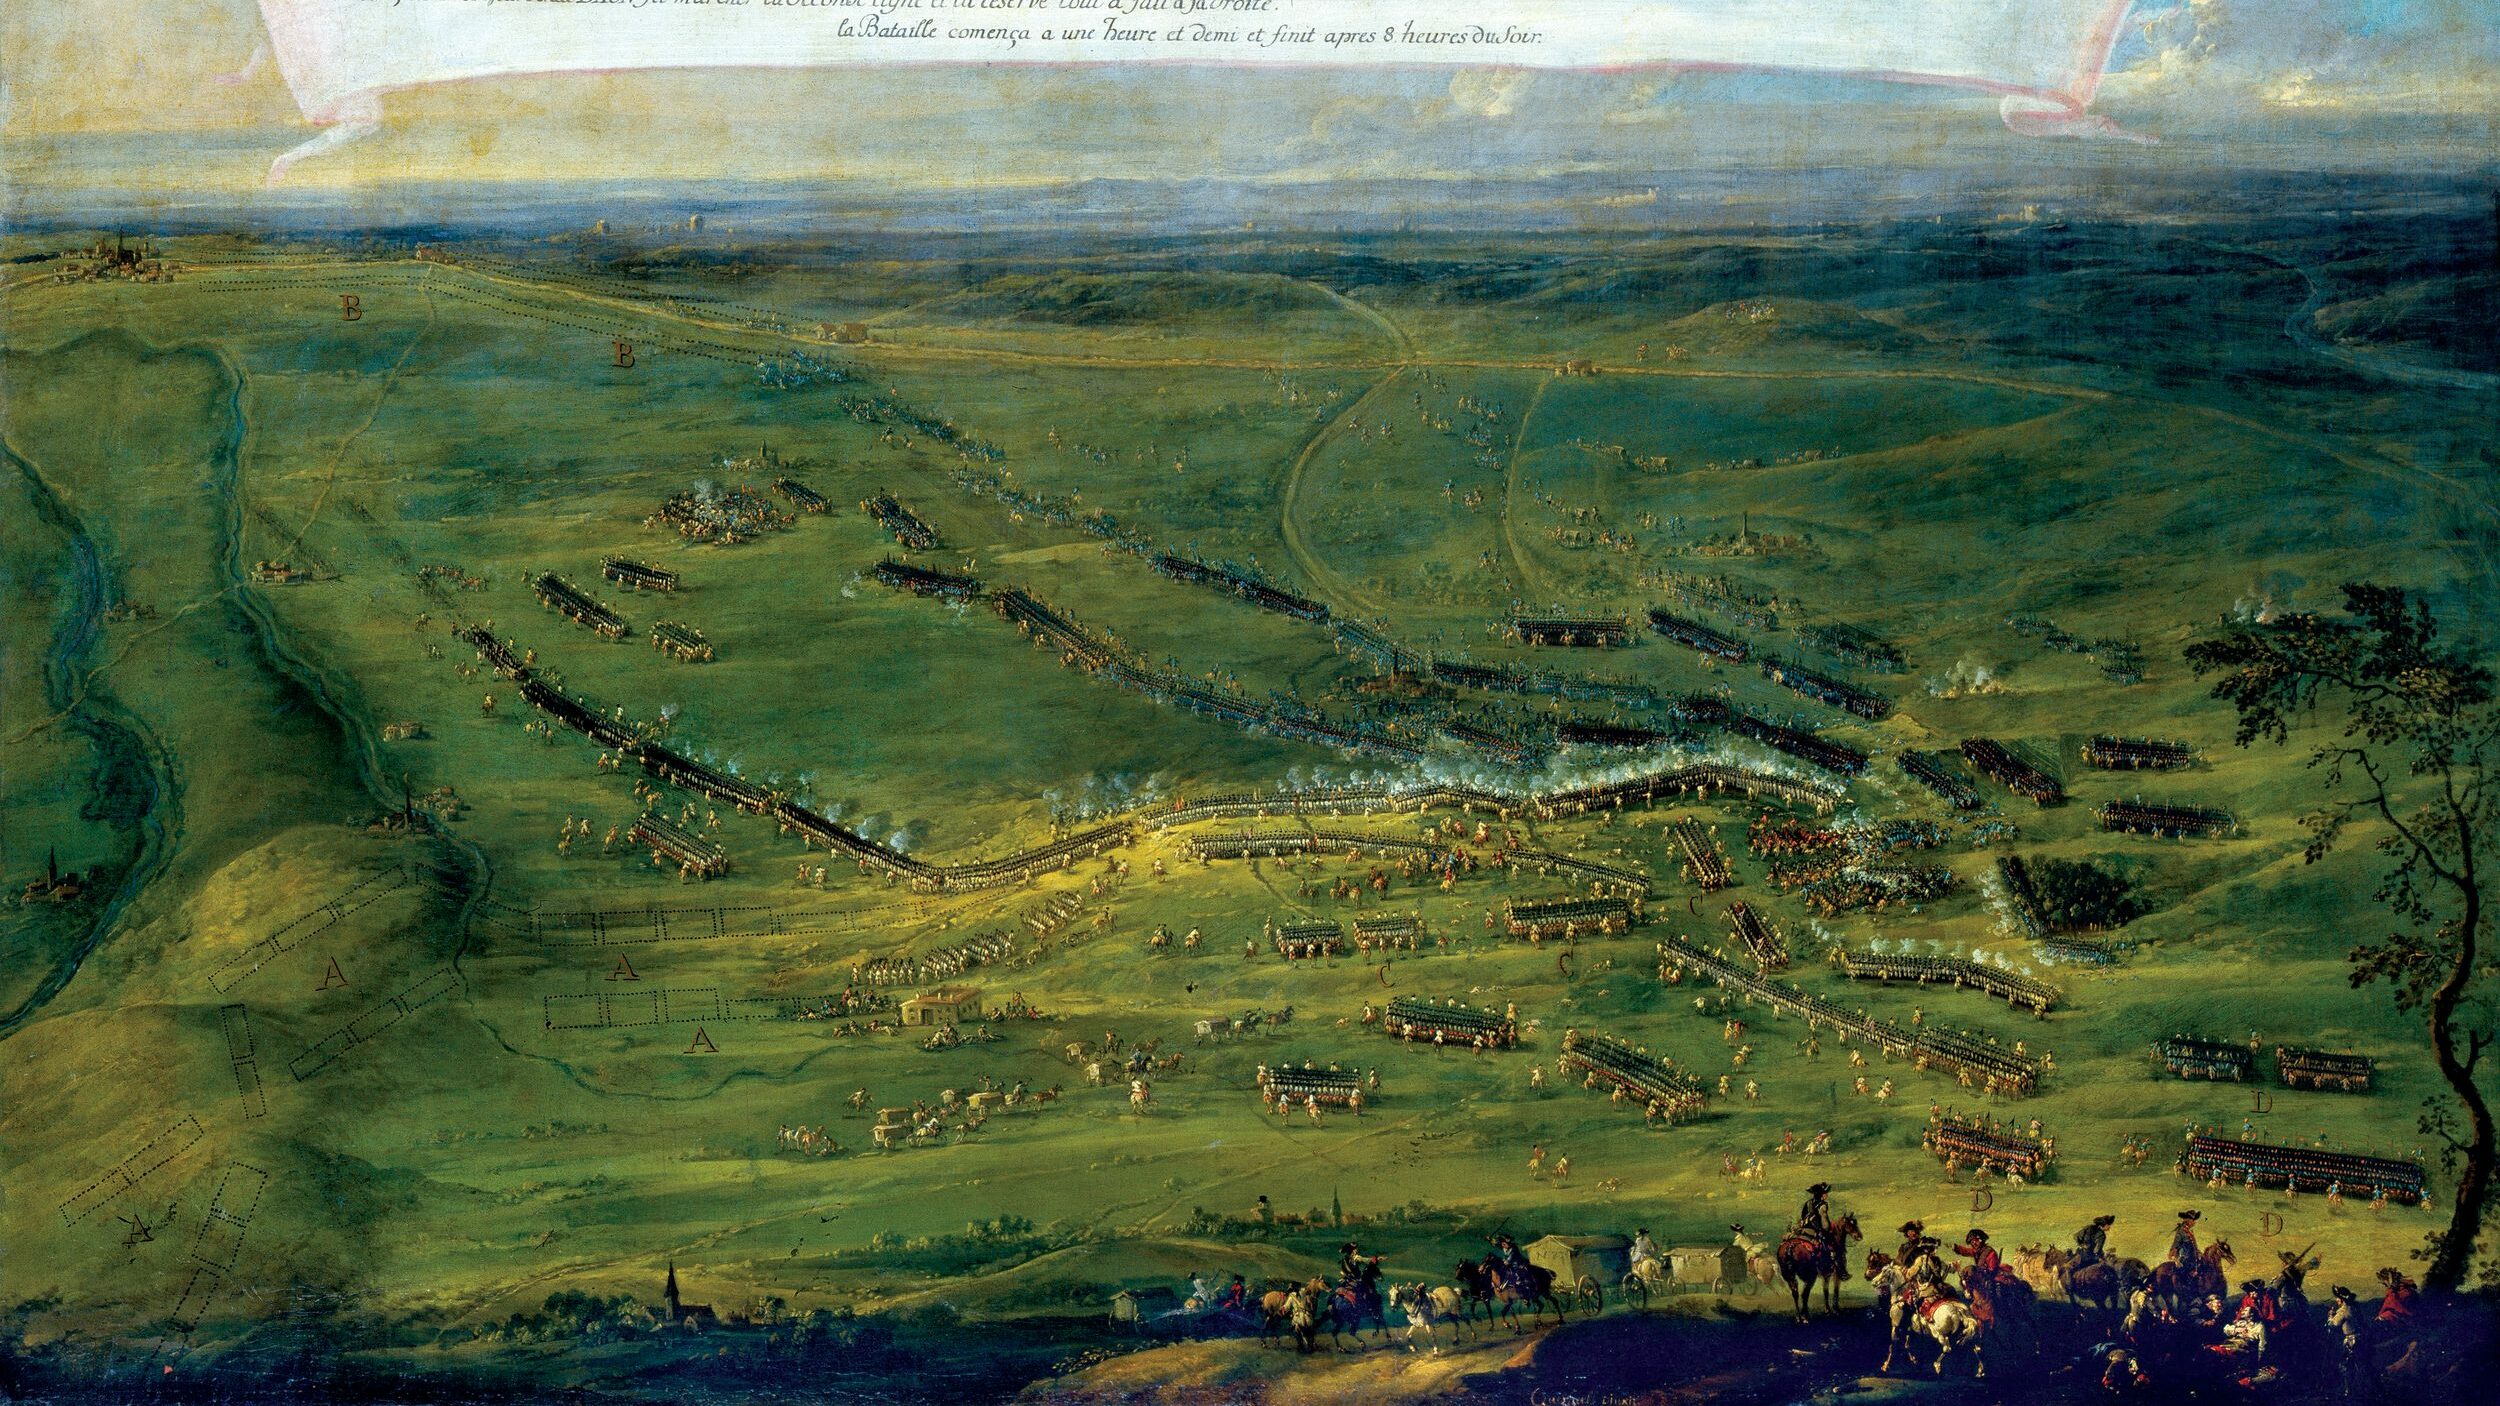 A bird’s eye view of the Battle of Kolin, painted shortly after the fighting, shows the perfect formations the well-trained Prussians maintained on the battlefield.